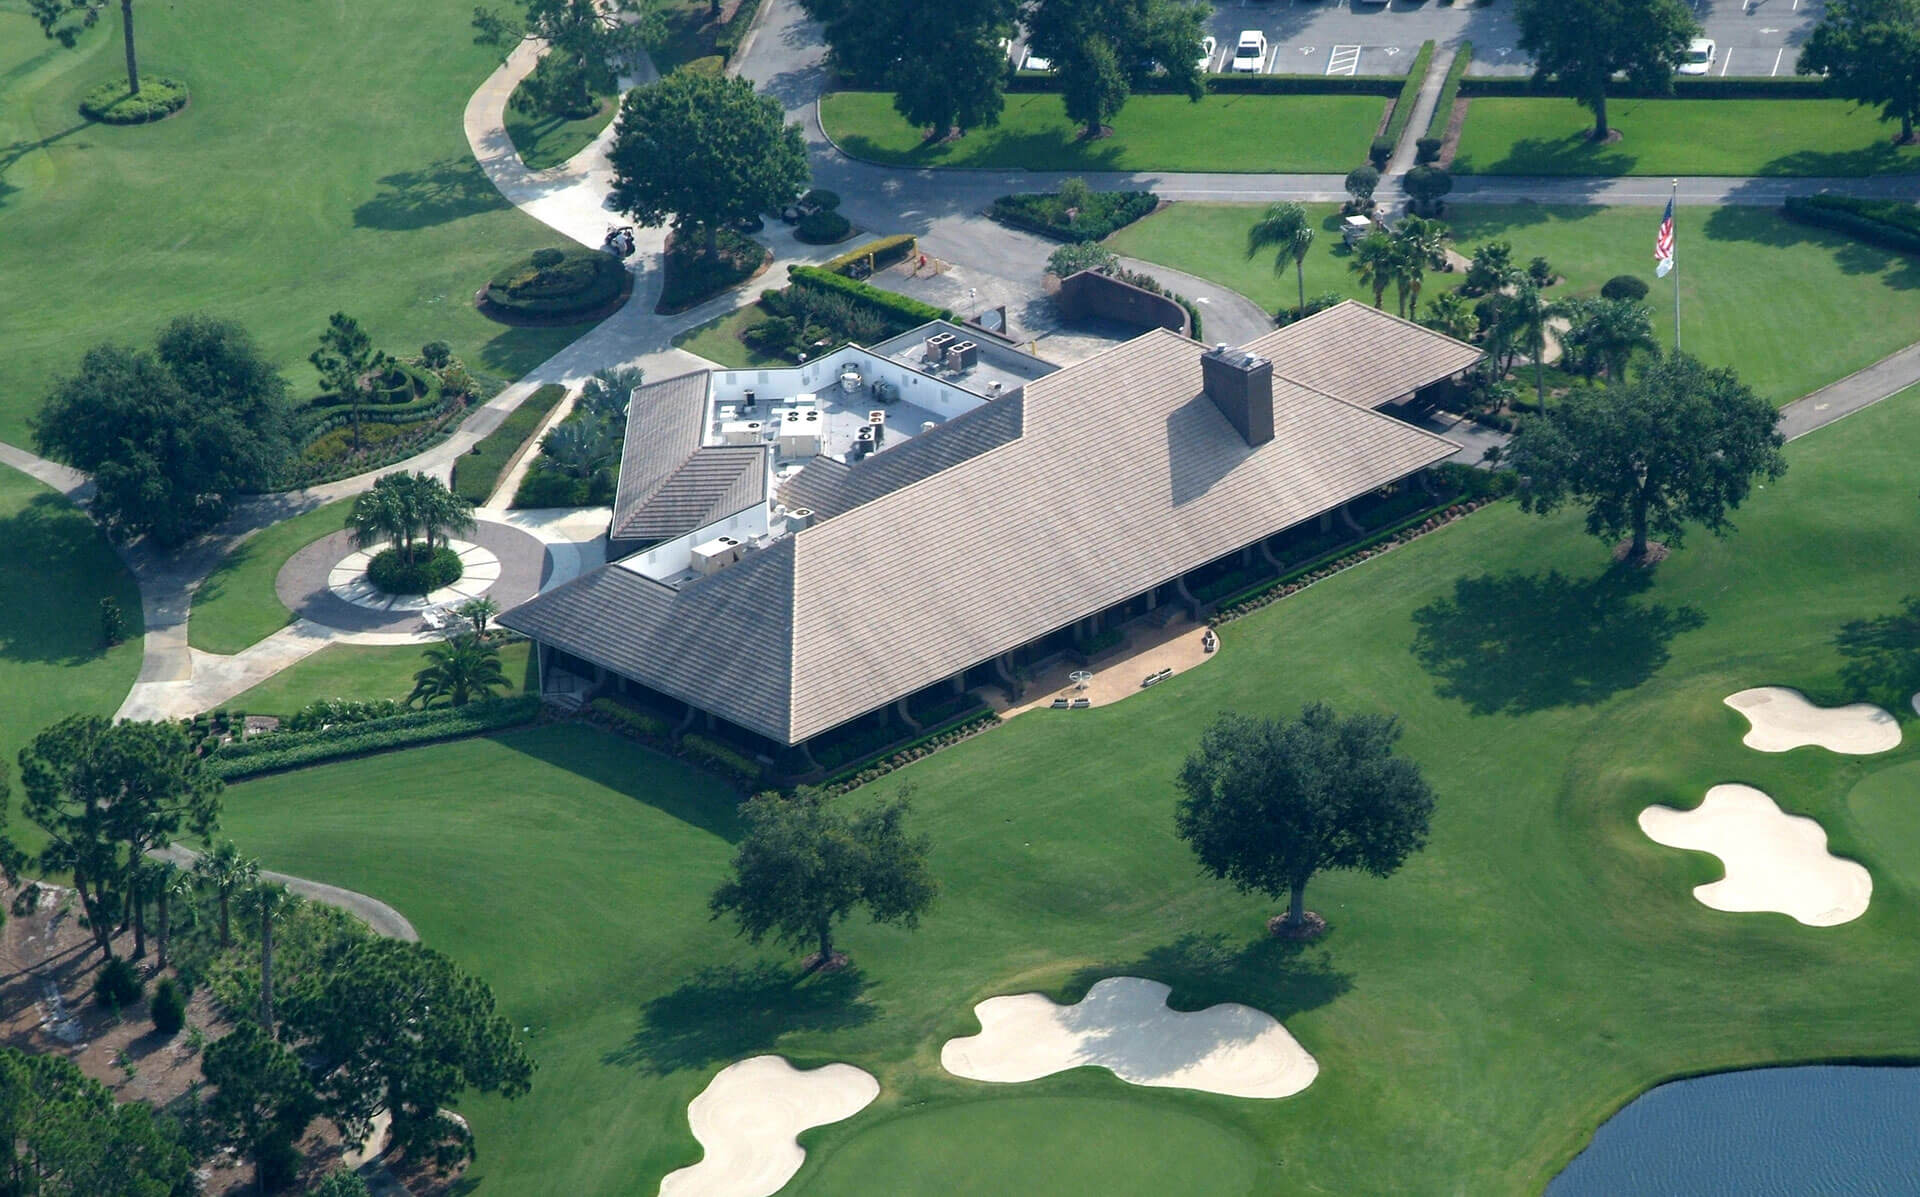 Vero Beach Roofing, Inc. - Commercial Roofing Services, Florida Roofing Contractor